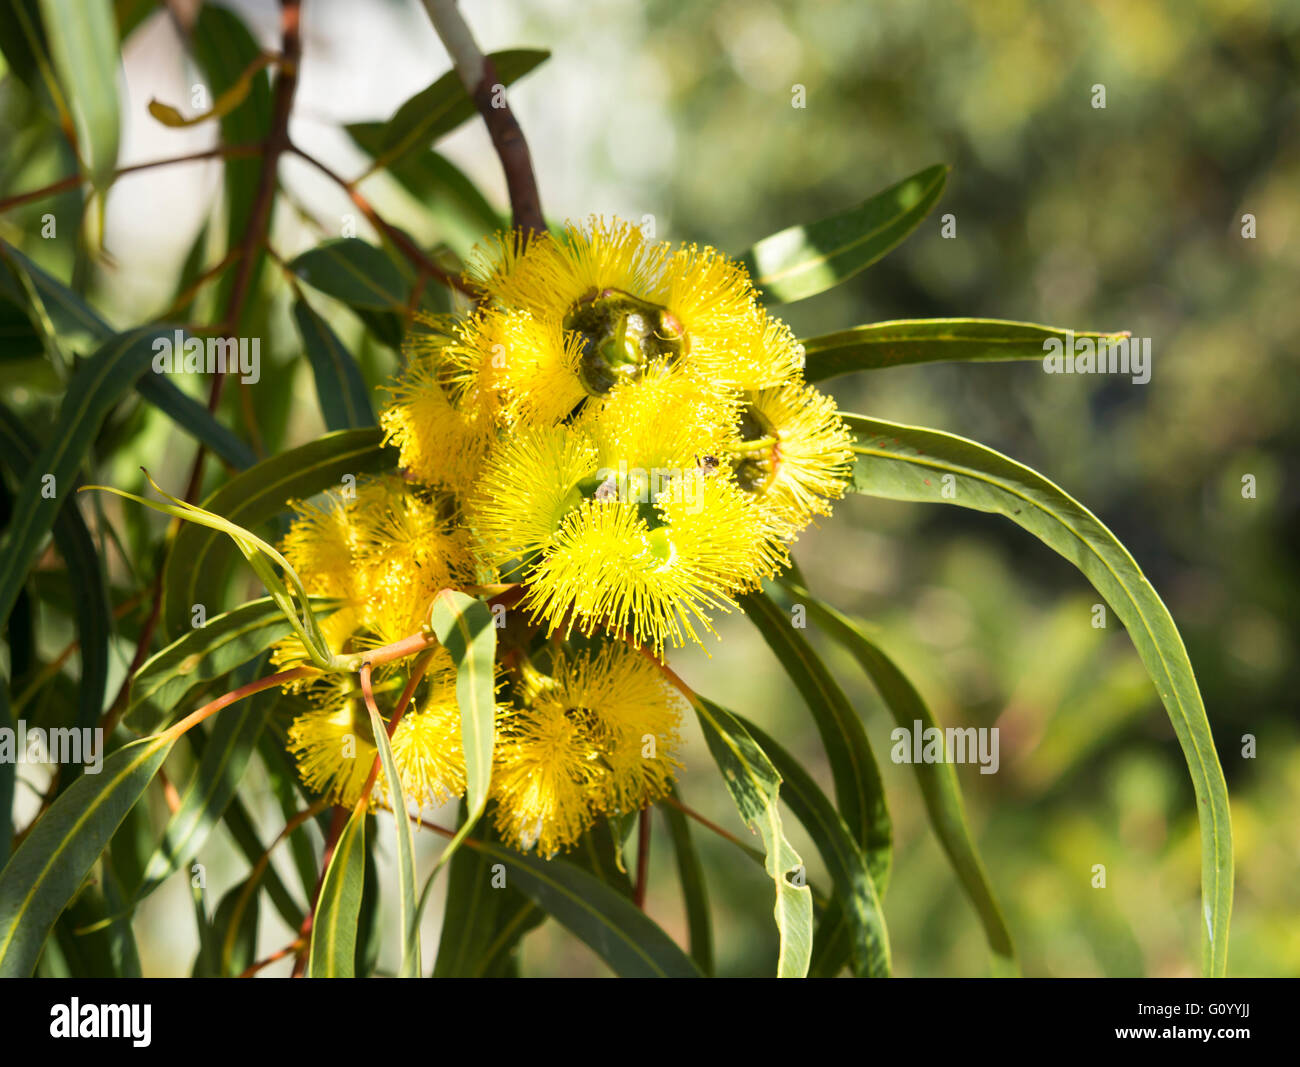 West Australian  Illyarrie mallee tree eucalyptus  erythrocorys  in autumn bloom with red capped large buds  and yellow flowers Stock Photo